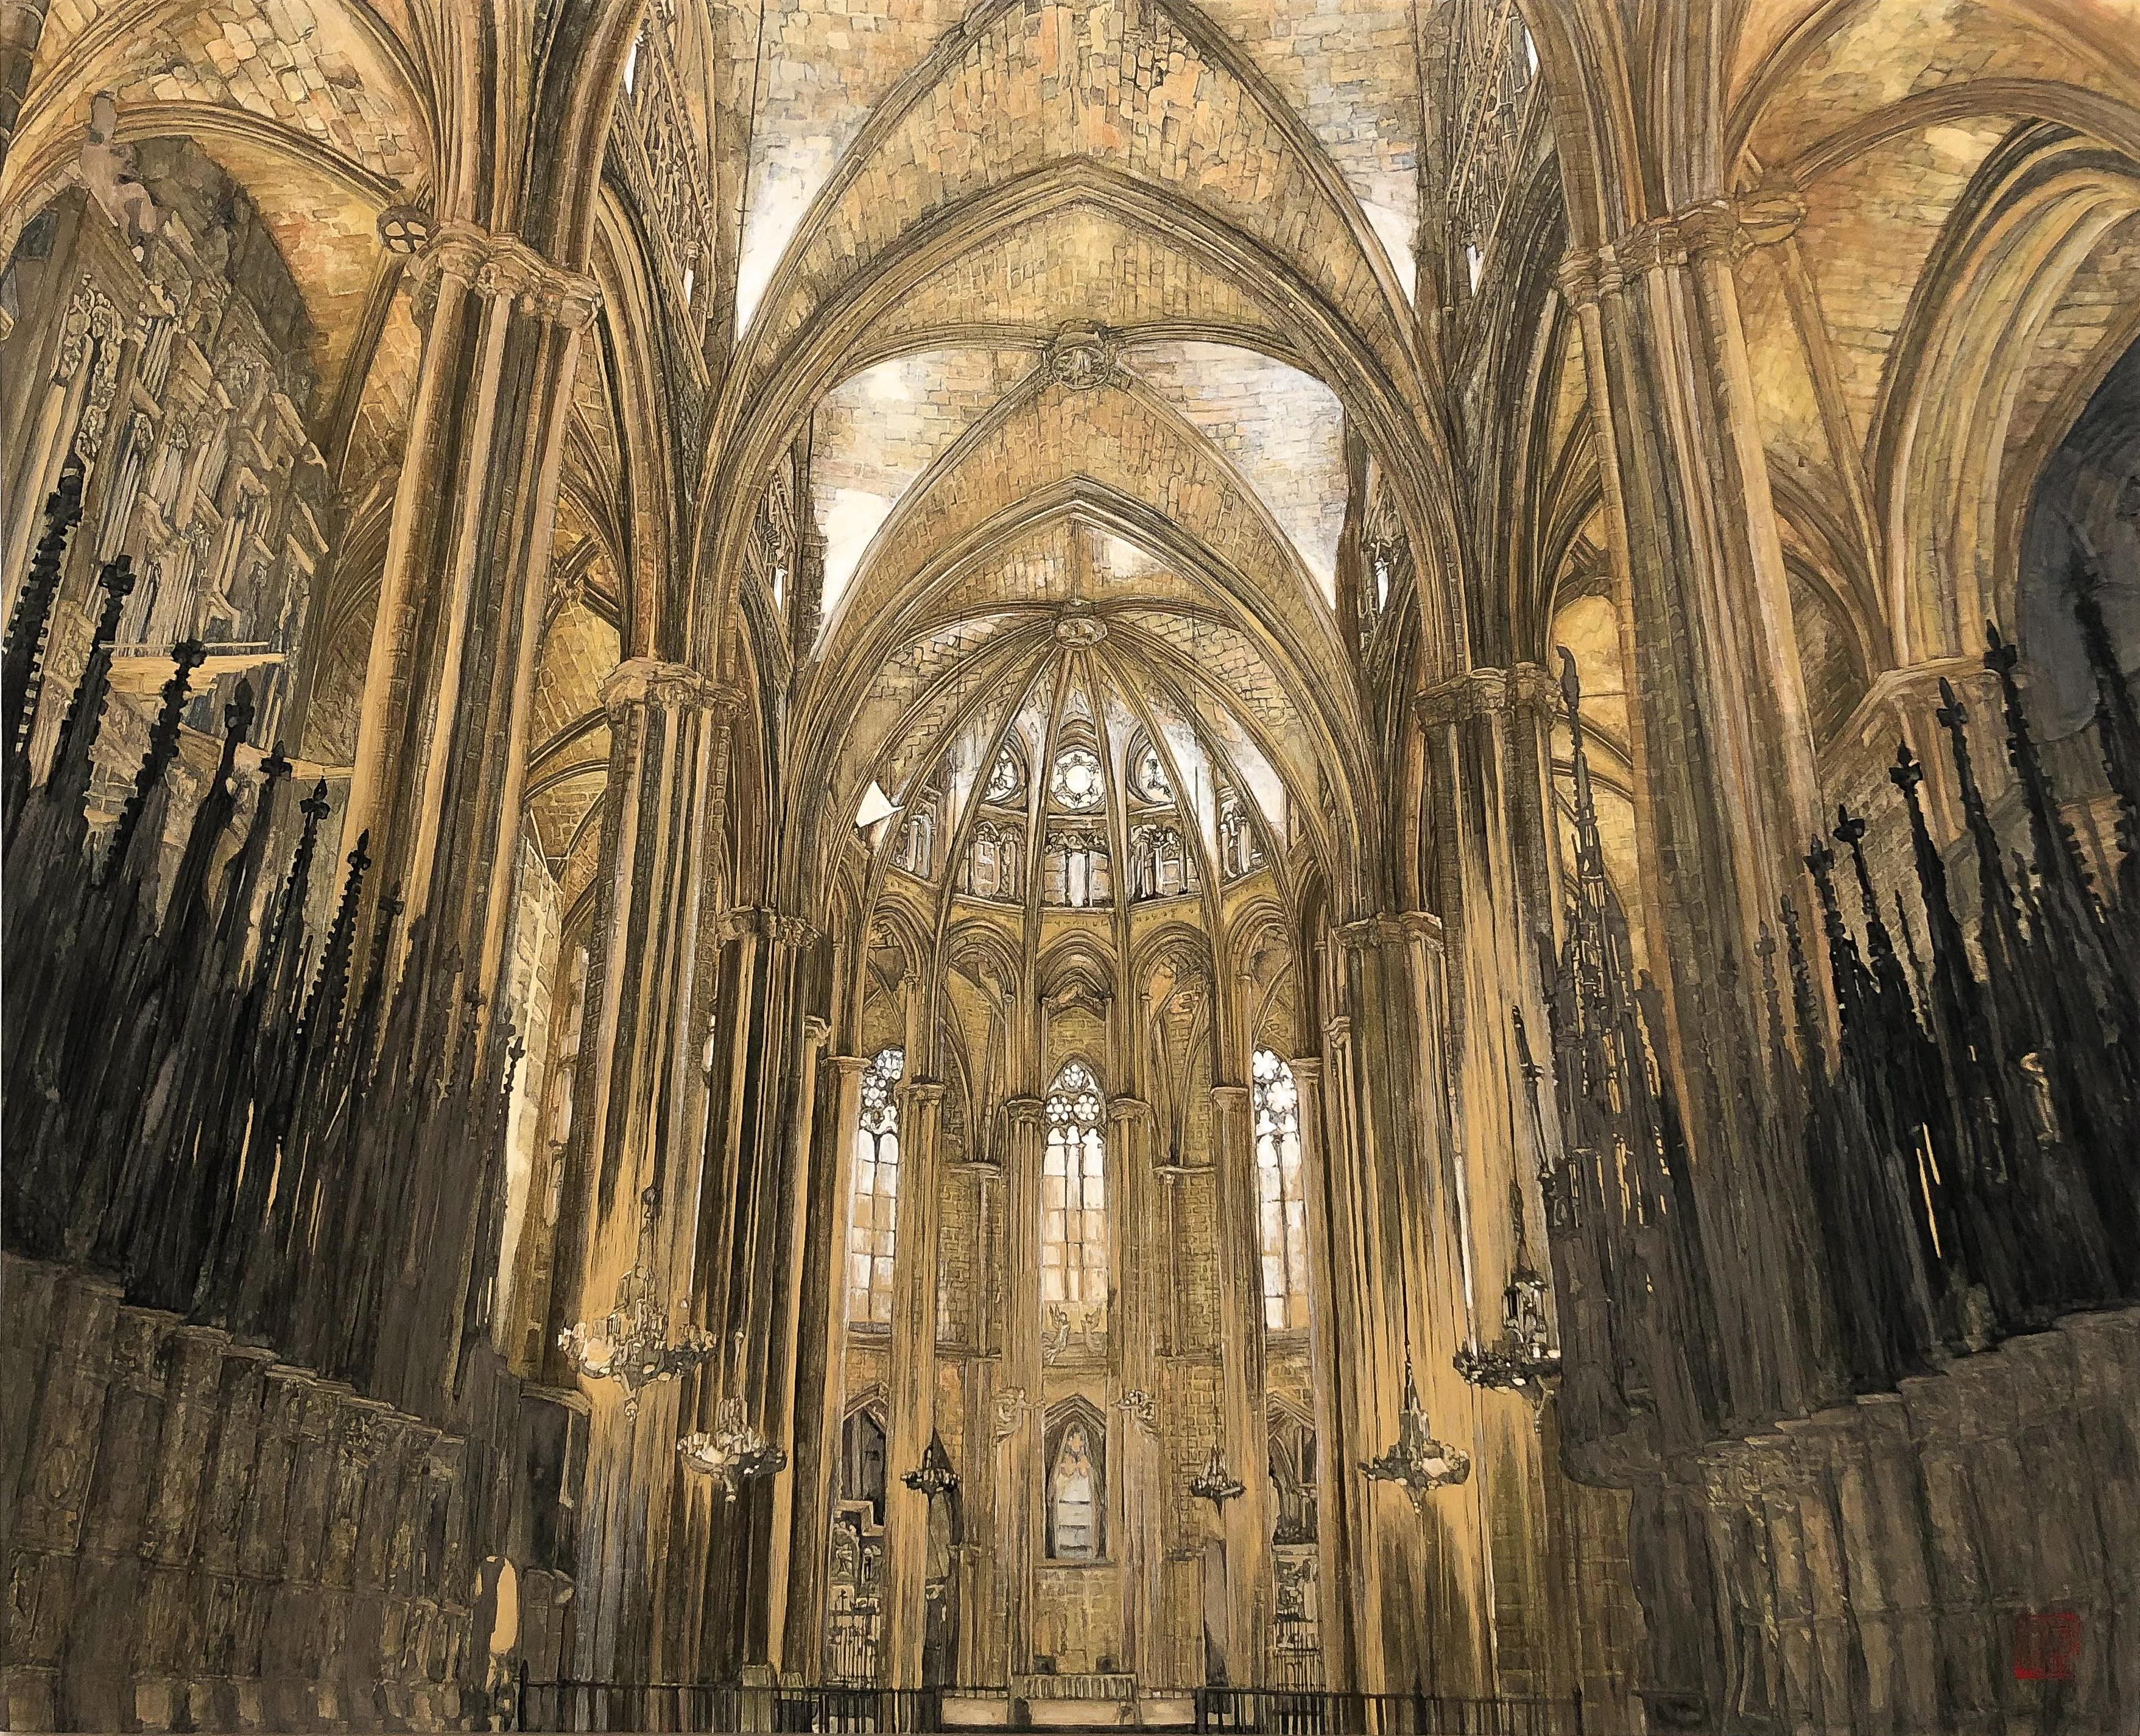 Maria Mitsumori Interior Painting - Barcelona Cathedral - 24k Gold and Minerals, Architecture, Gothic, Realism